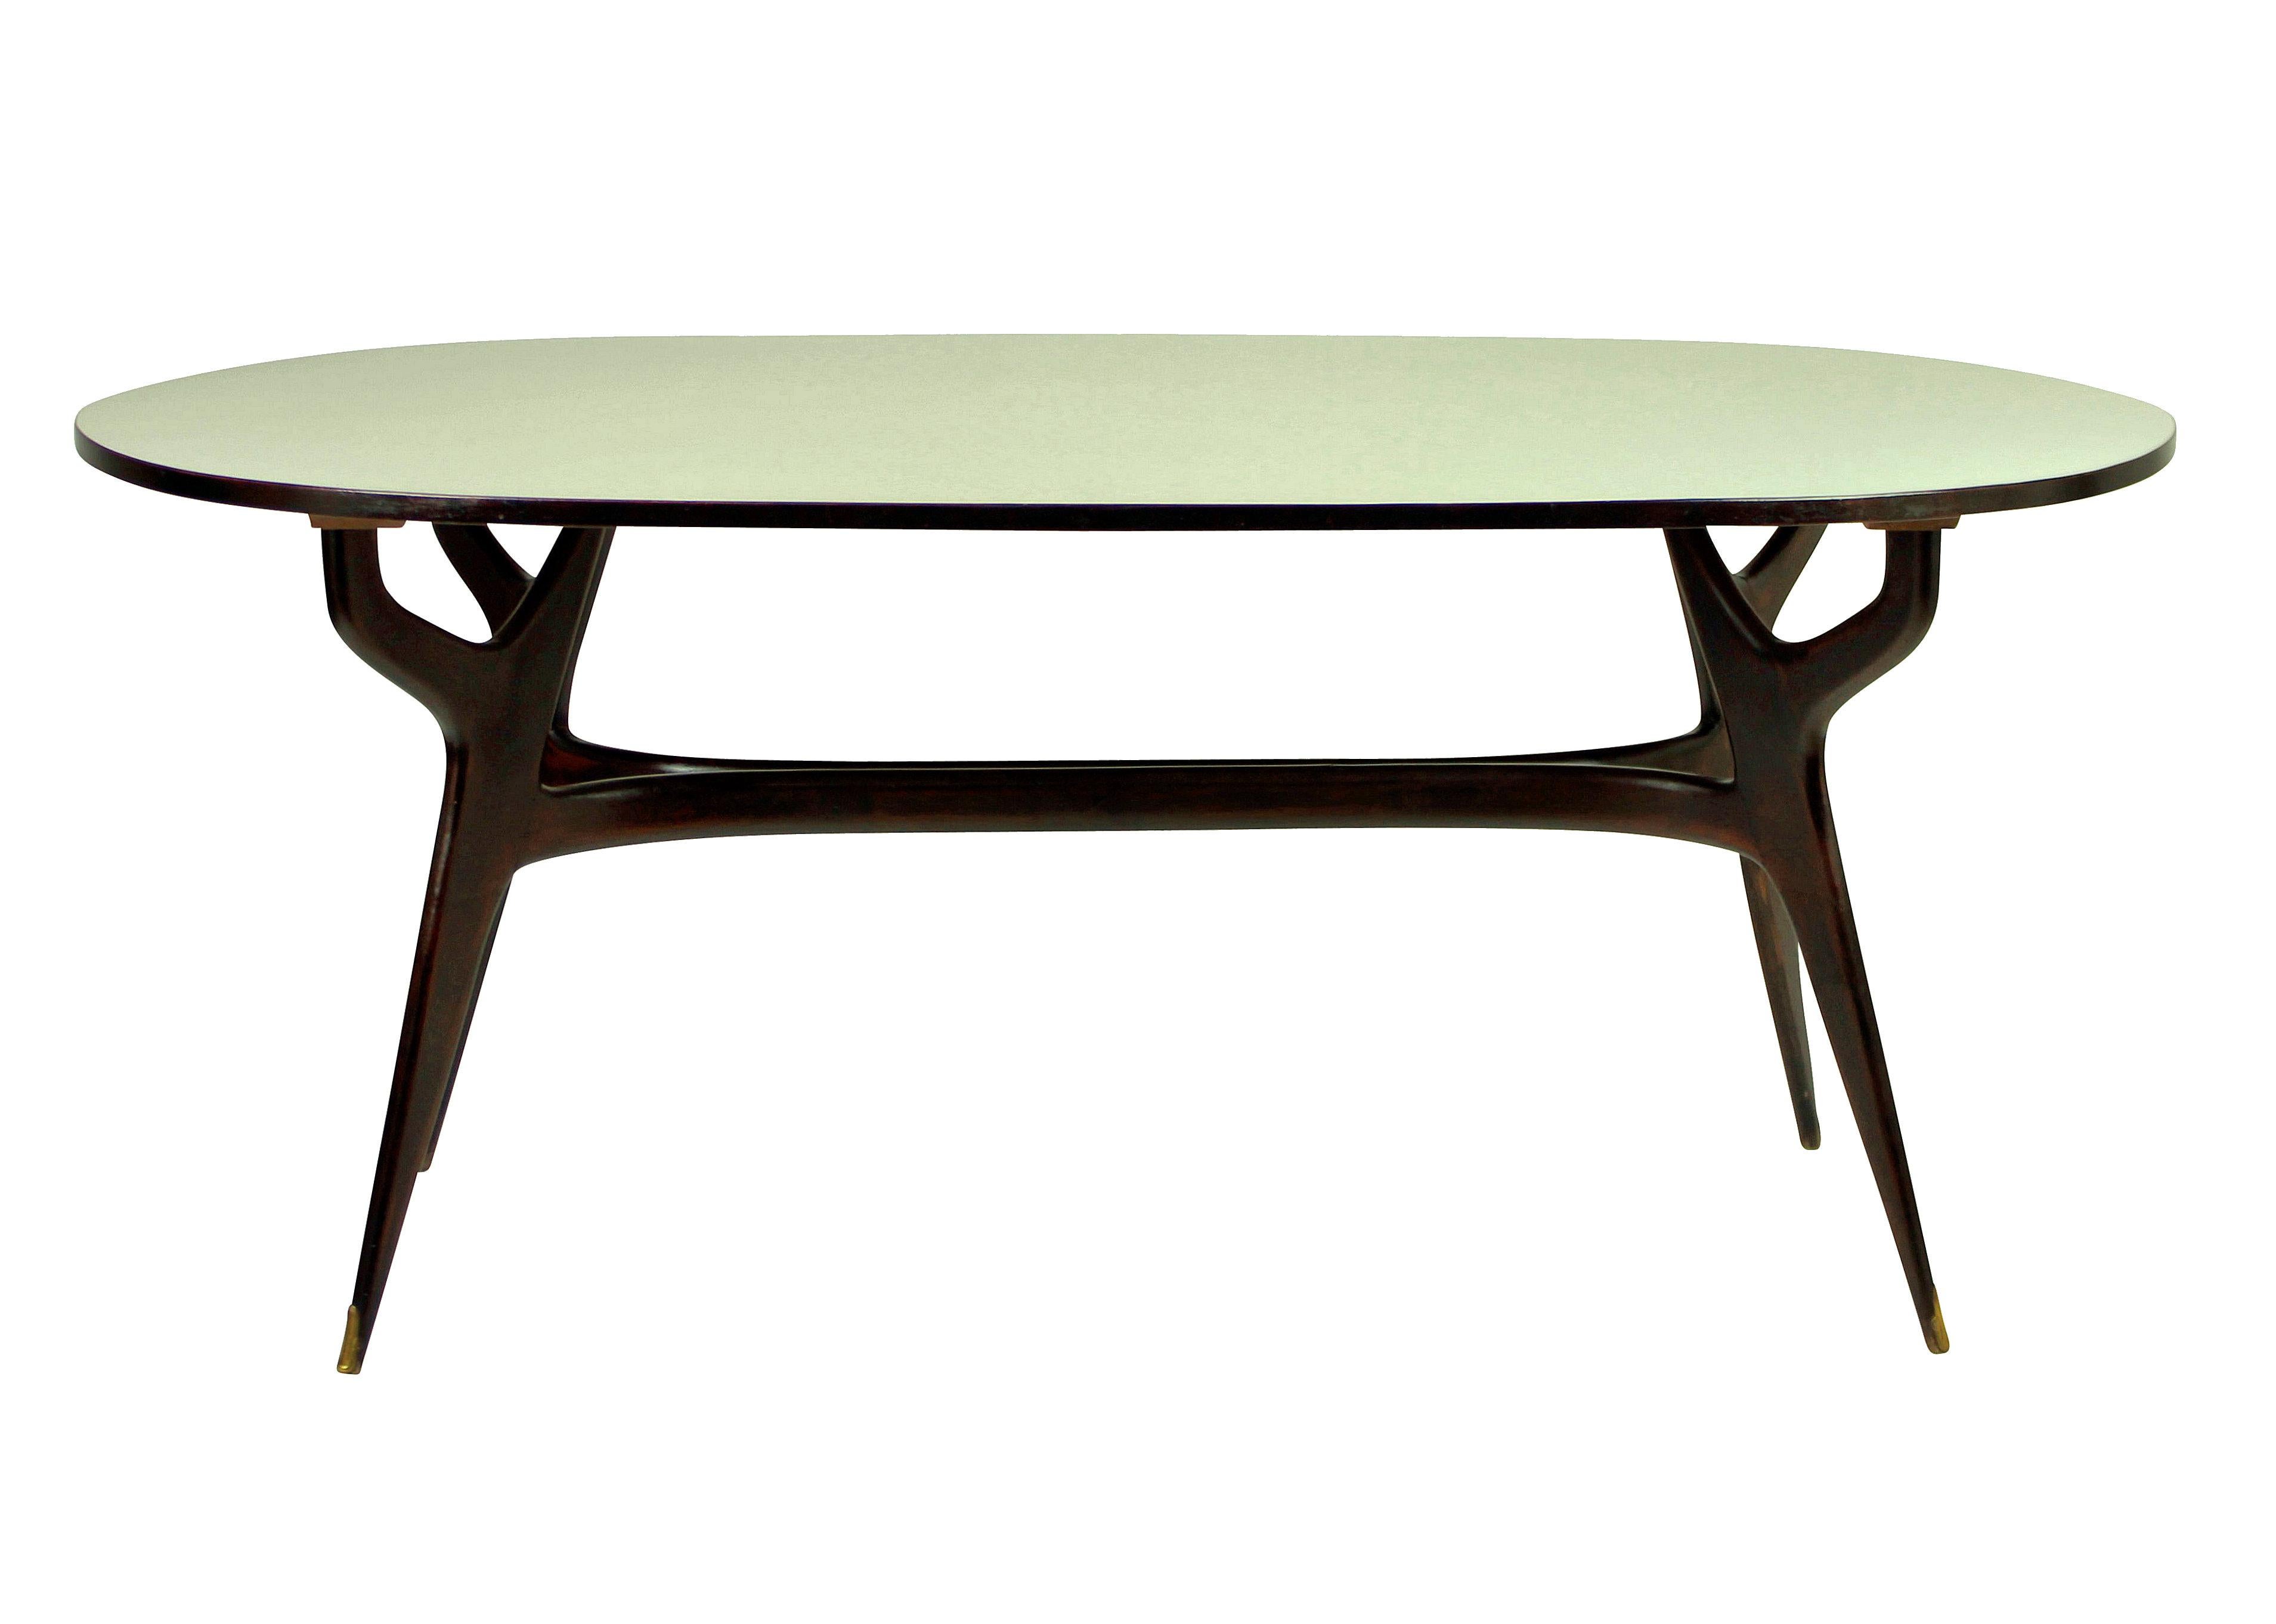 Italian Sculptural Dining Table by Ico Parisi